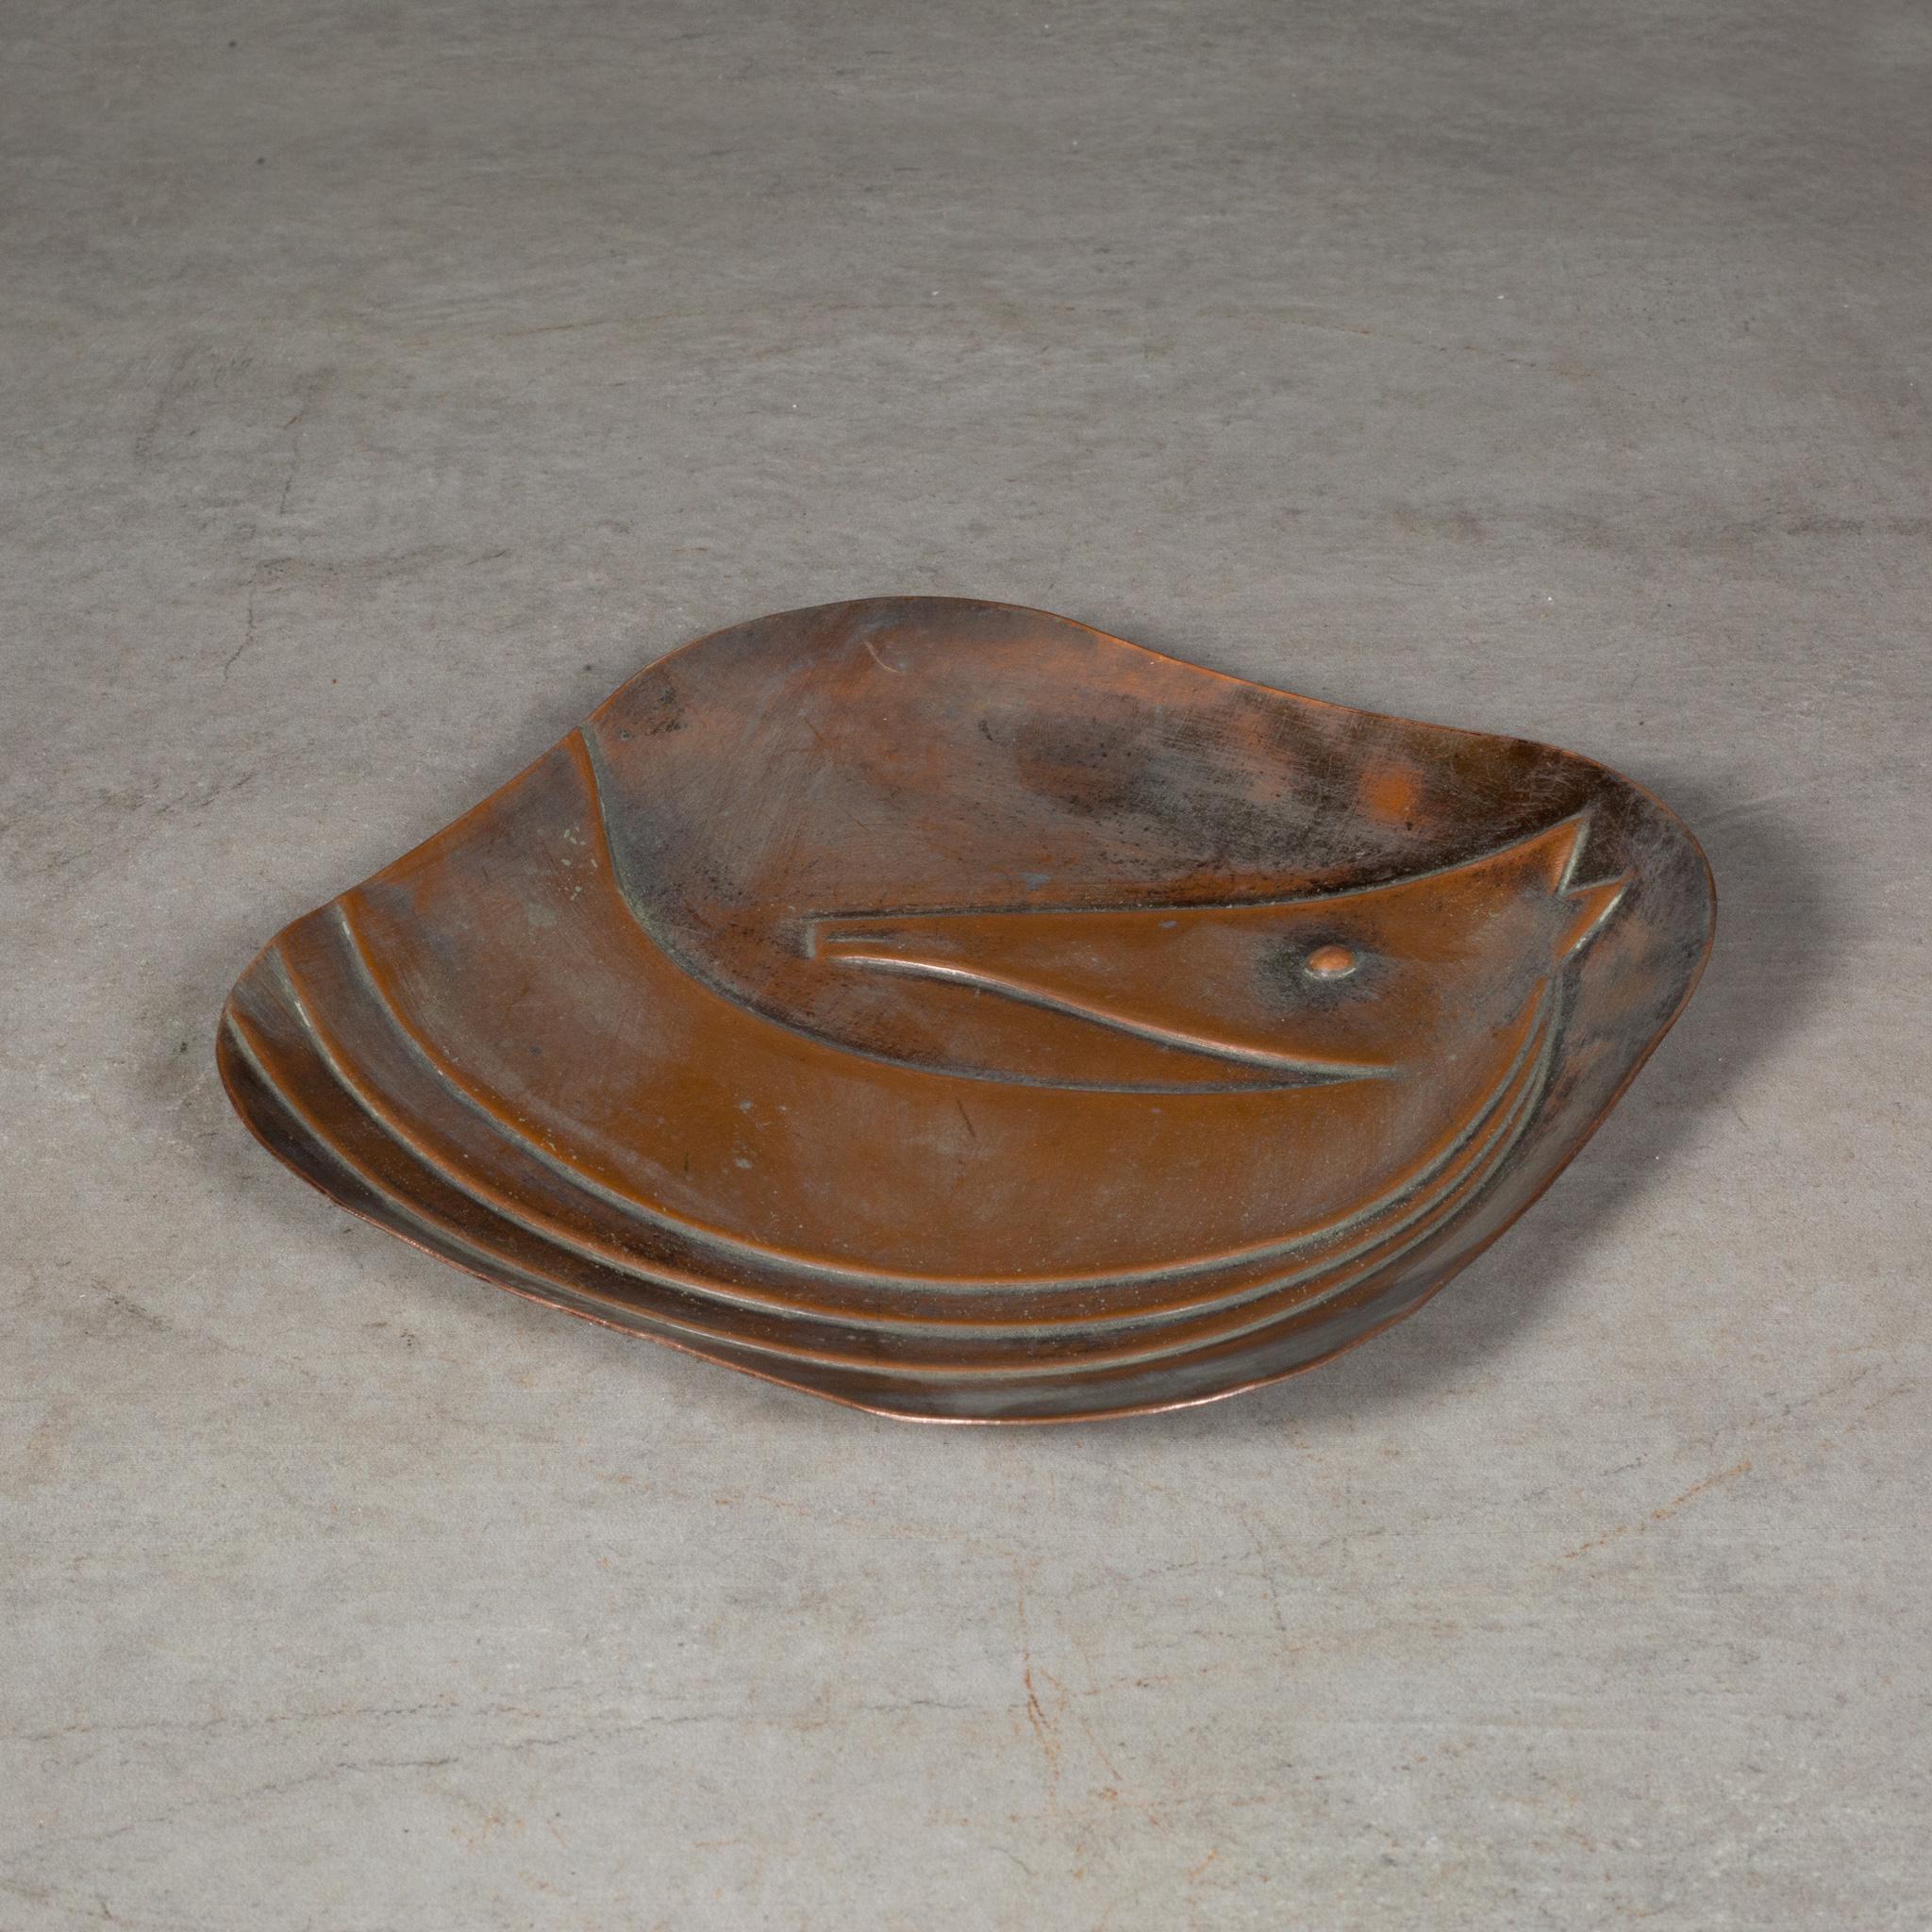 ABOUT

A mid-century copper trinket dish designed by Francisco Rebajes with stylized horse motive. Stamped 